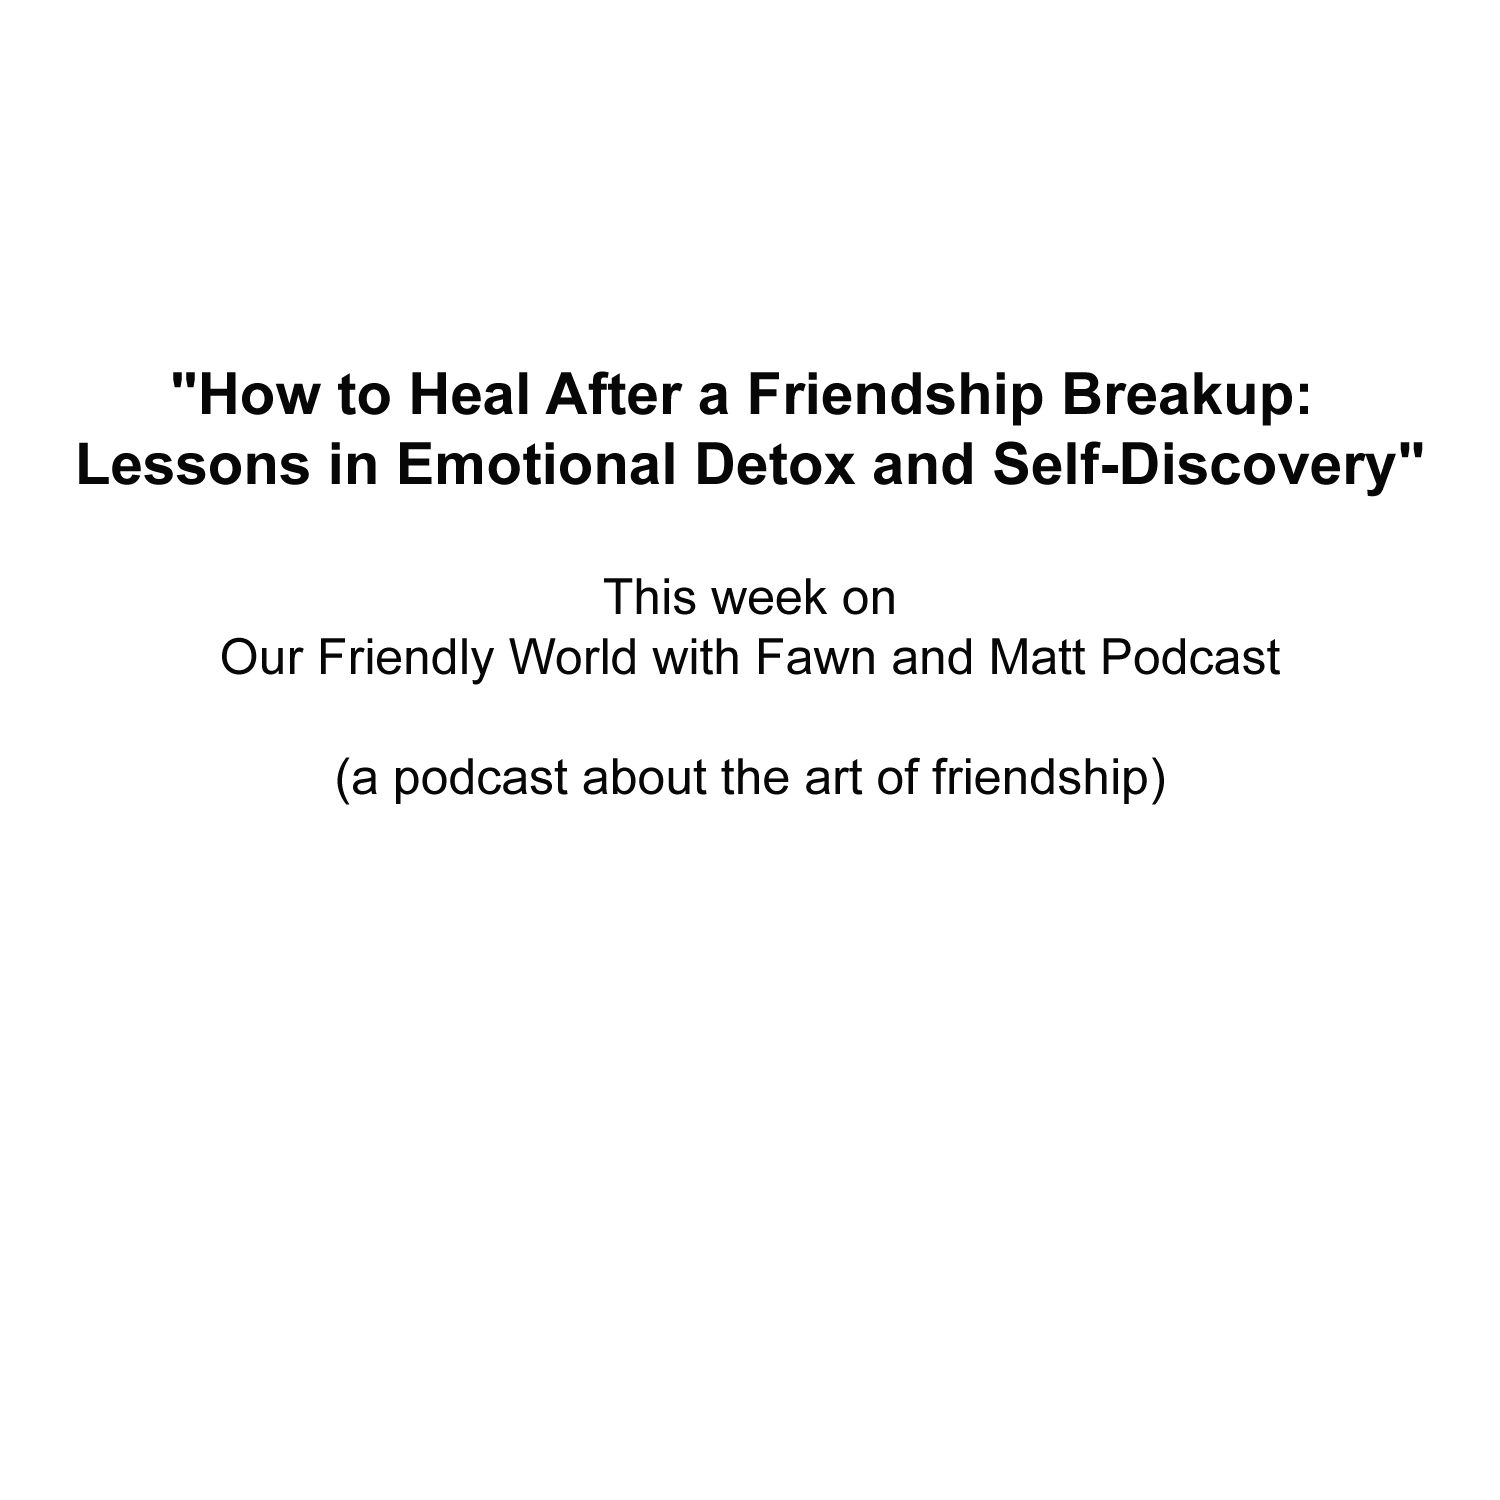 How to Heal After a Friendship Breakup Lessons in Emotional Detox and Self-Discovery